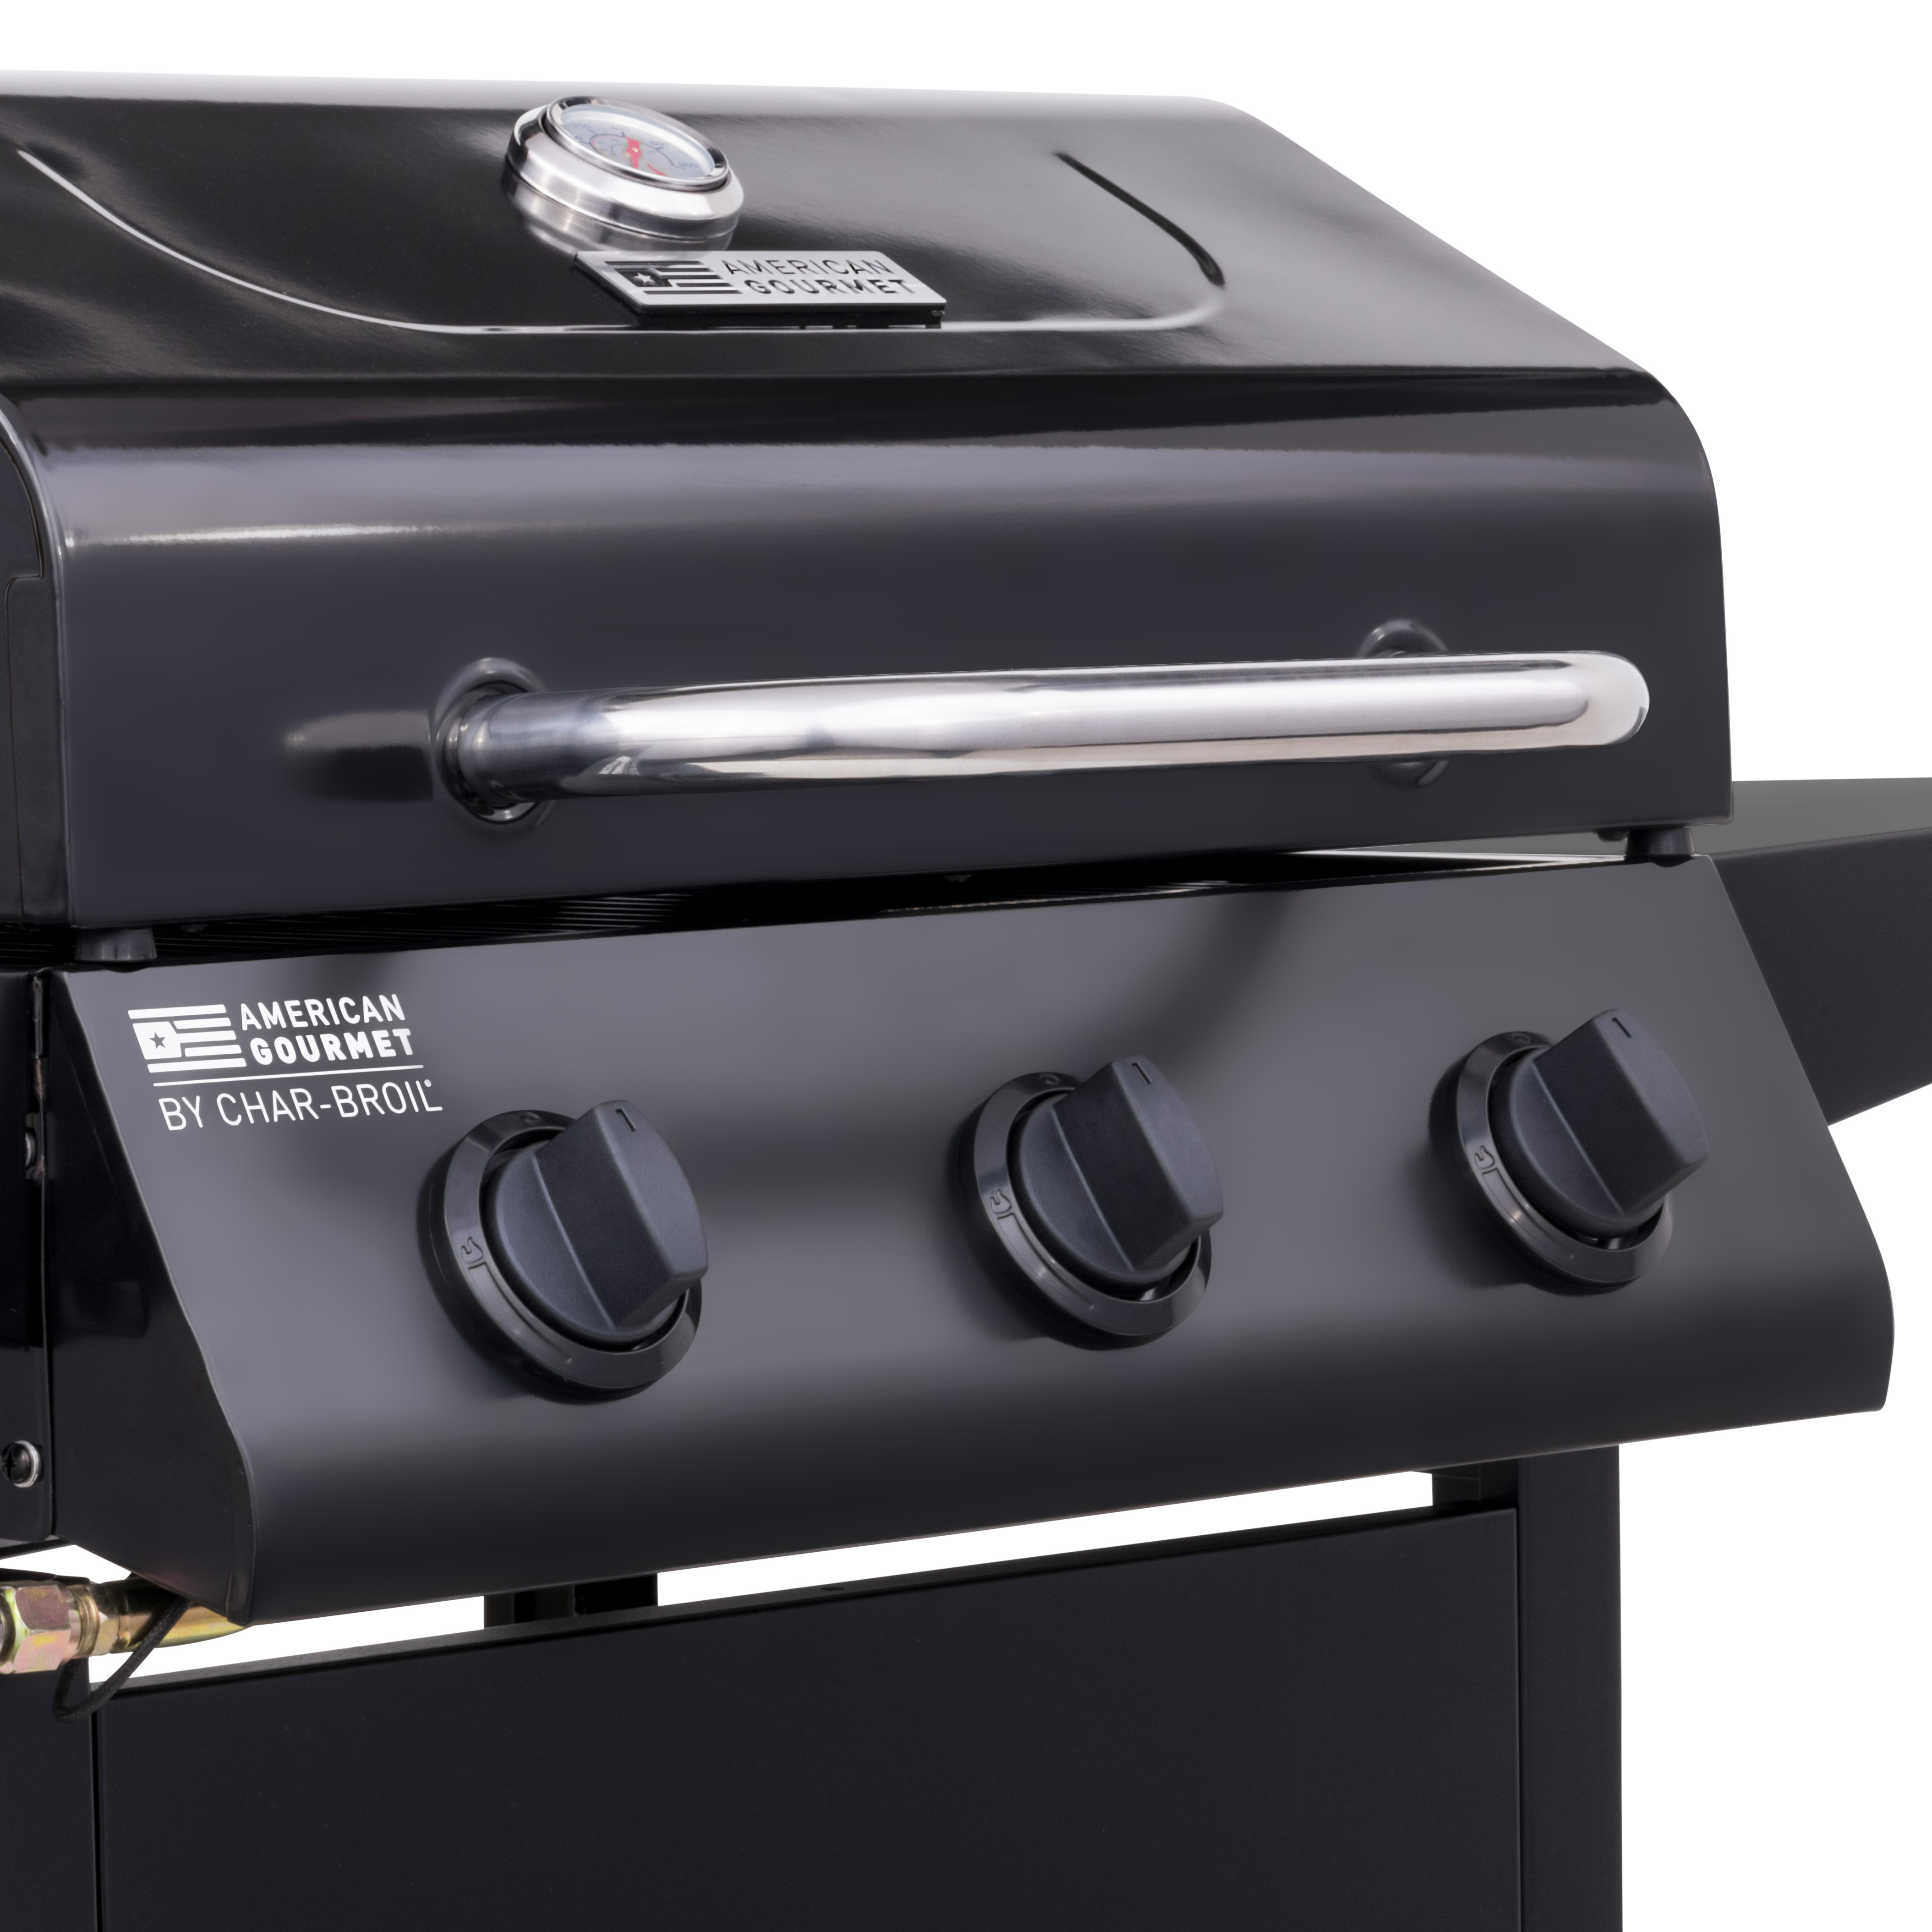 American Gourmet by Char-Broil 3-Burner Cart Liquid Propane (LP) Gas Grill - image 5 of 13